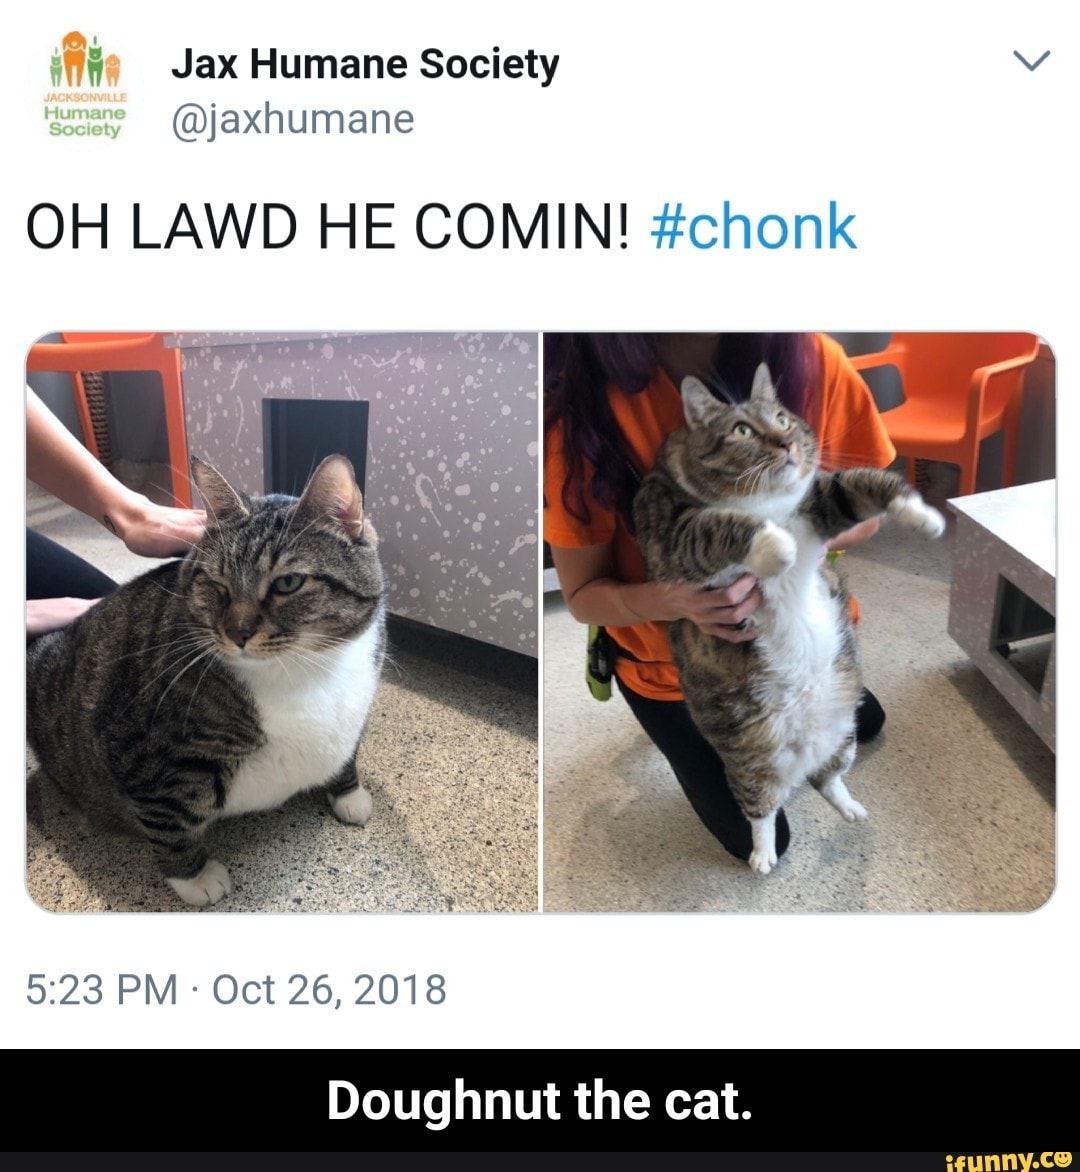 Oh Lawd He Comin Chonk Meme from img.ifunny.co. Oh Lawd He Comin Chonk Meme...